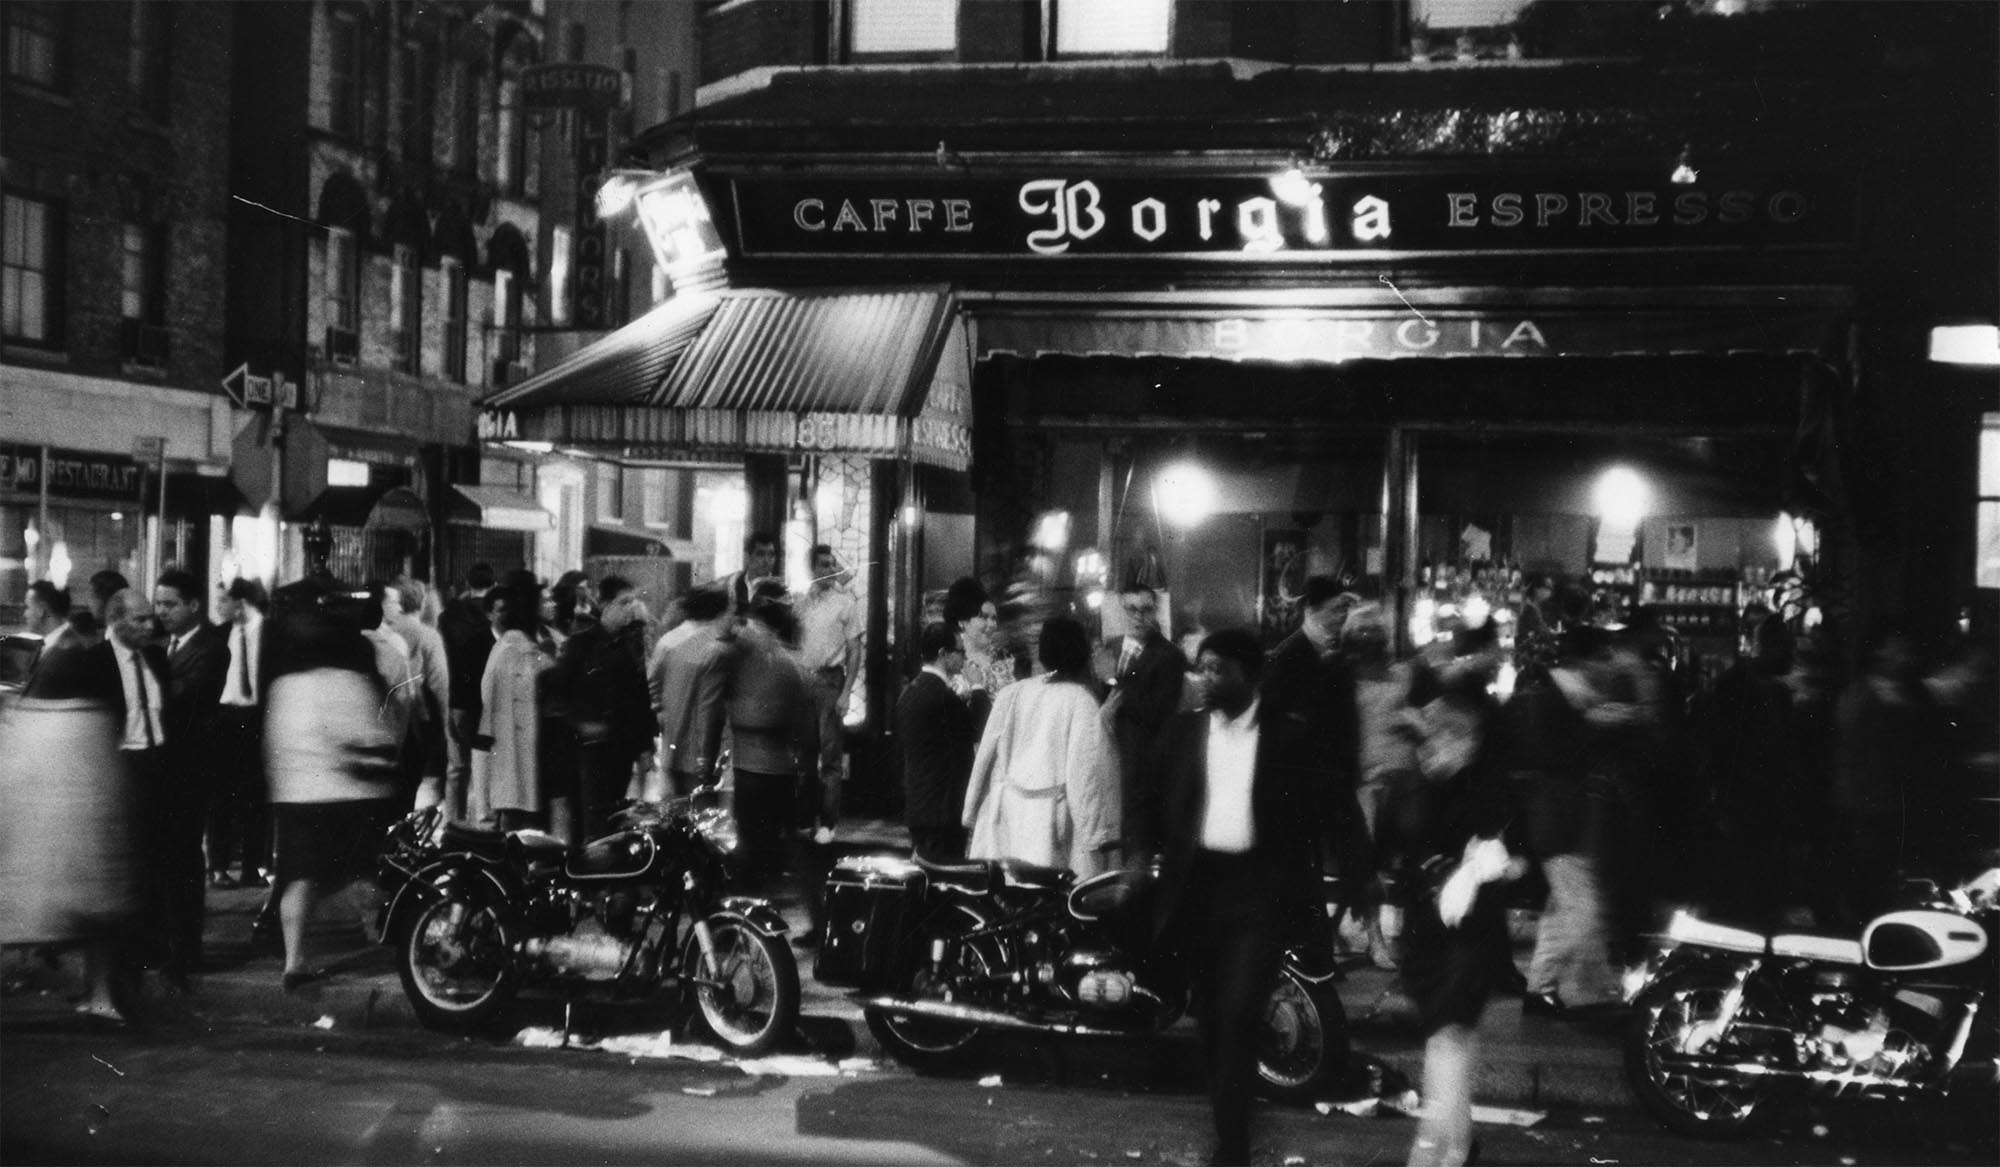 Outside the Caffe Borgia, at MacDougal and Bleecker Sts., 1966